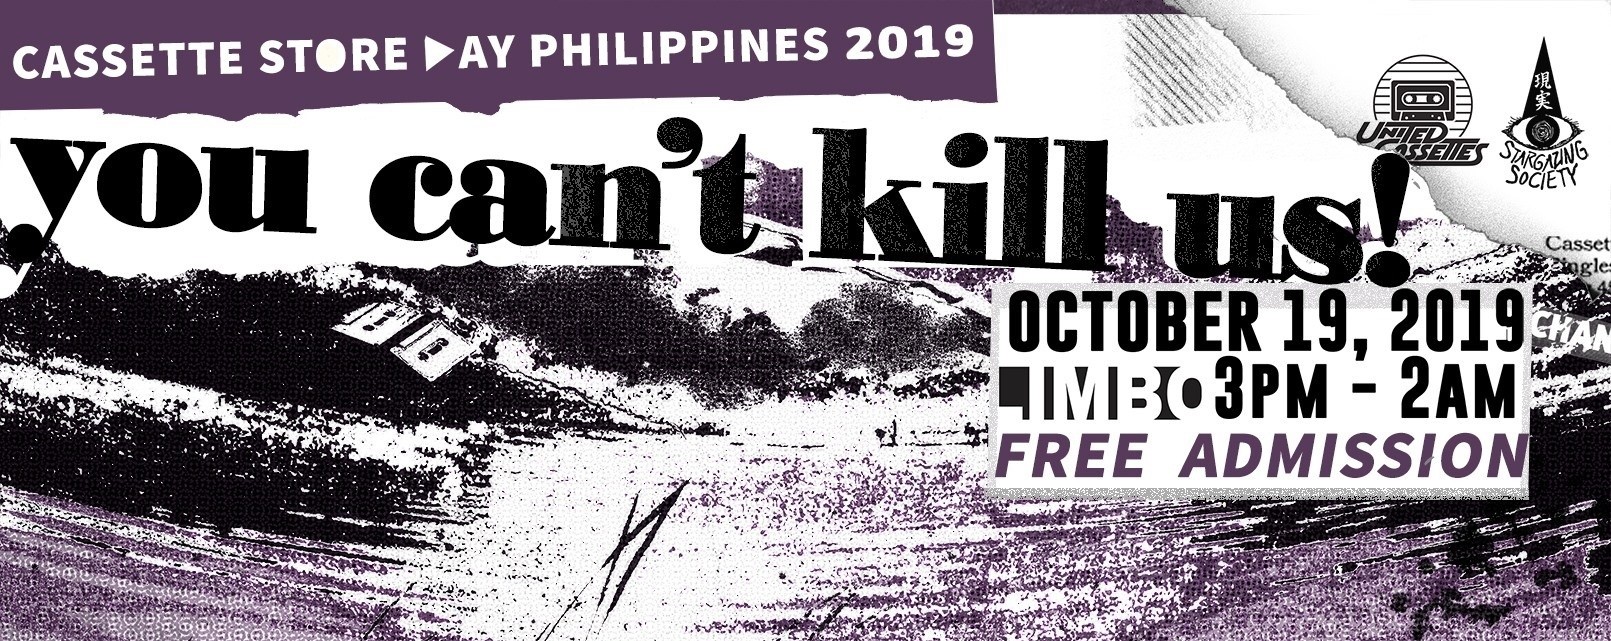 Cassette Store Day Philippines 2019: You Can't Kill Us!